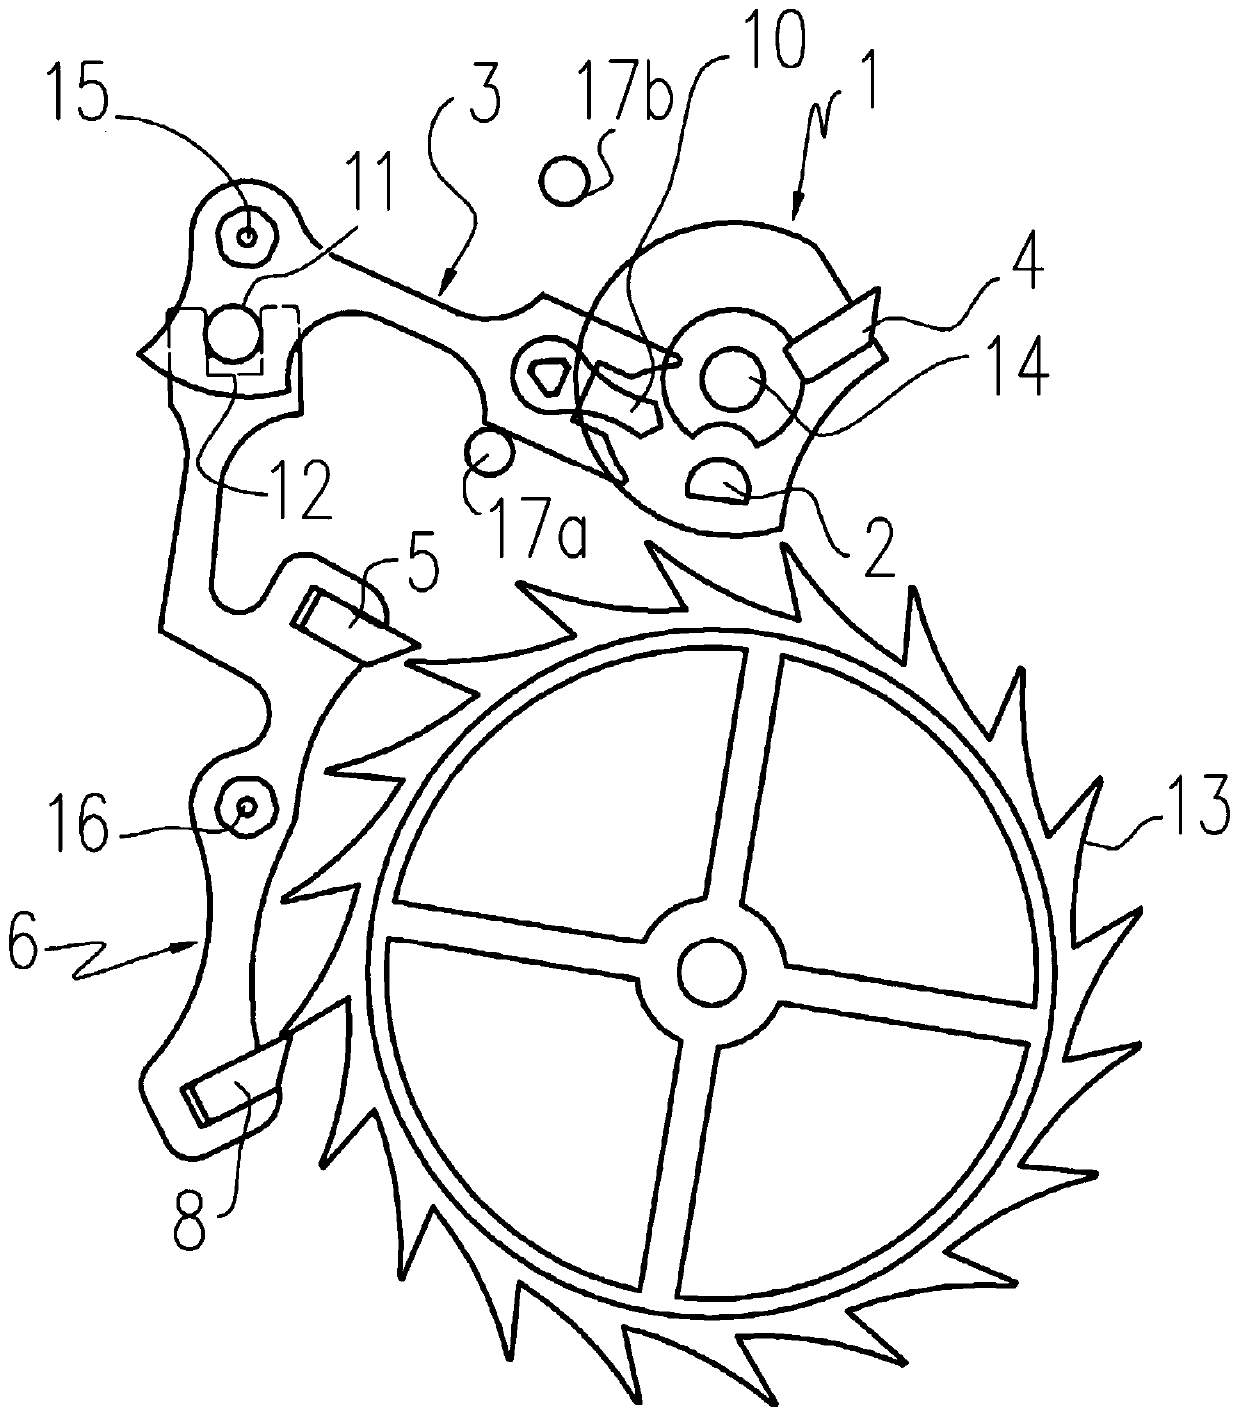 Pallet-type escapement structure of mechanical clocks and watches